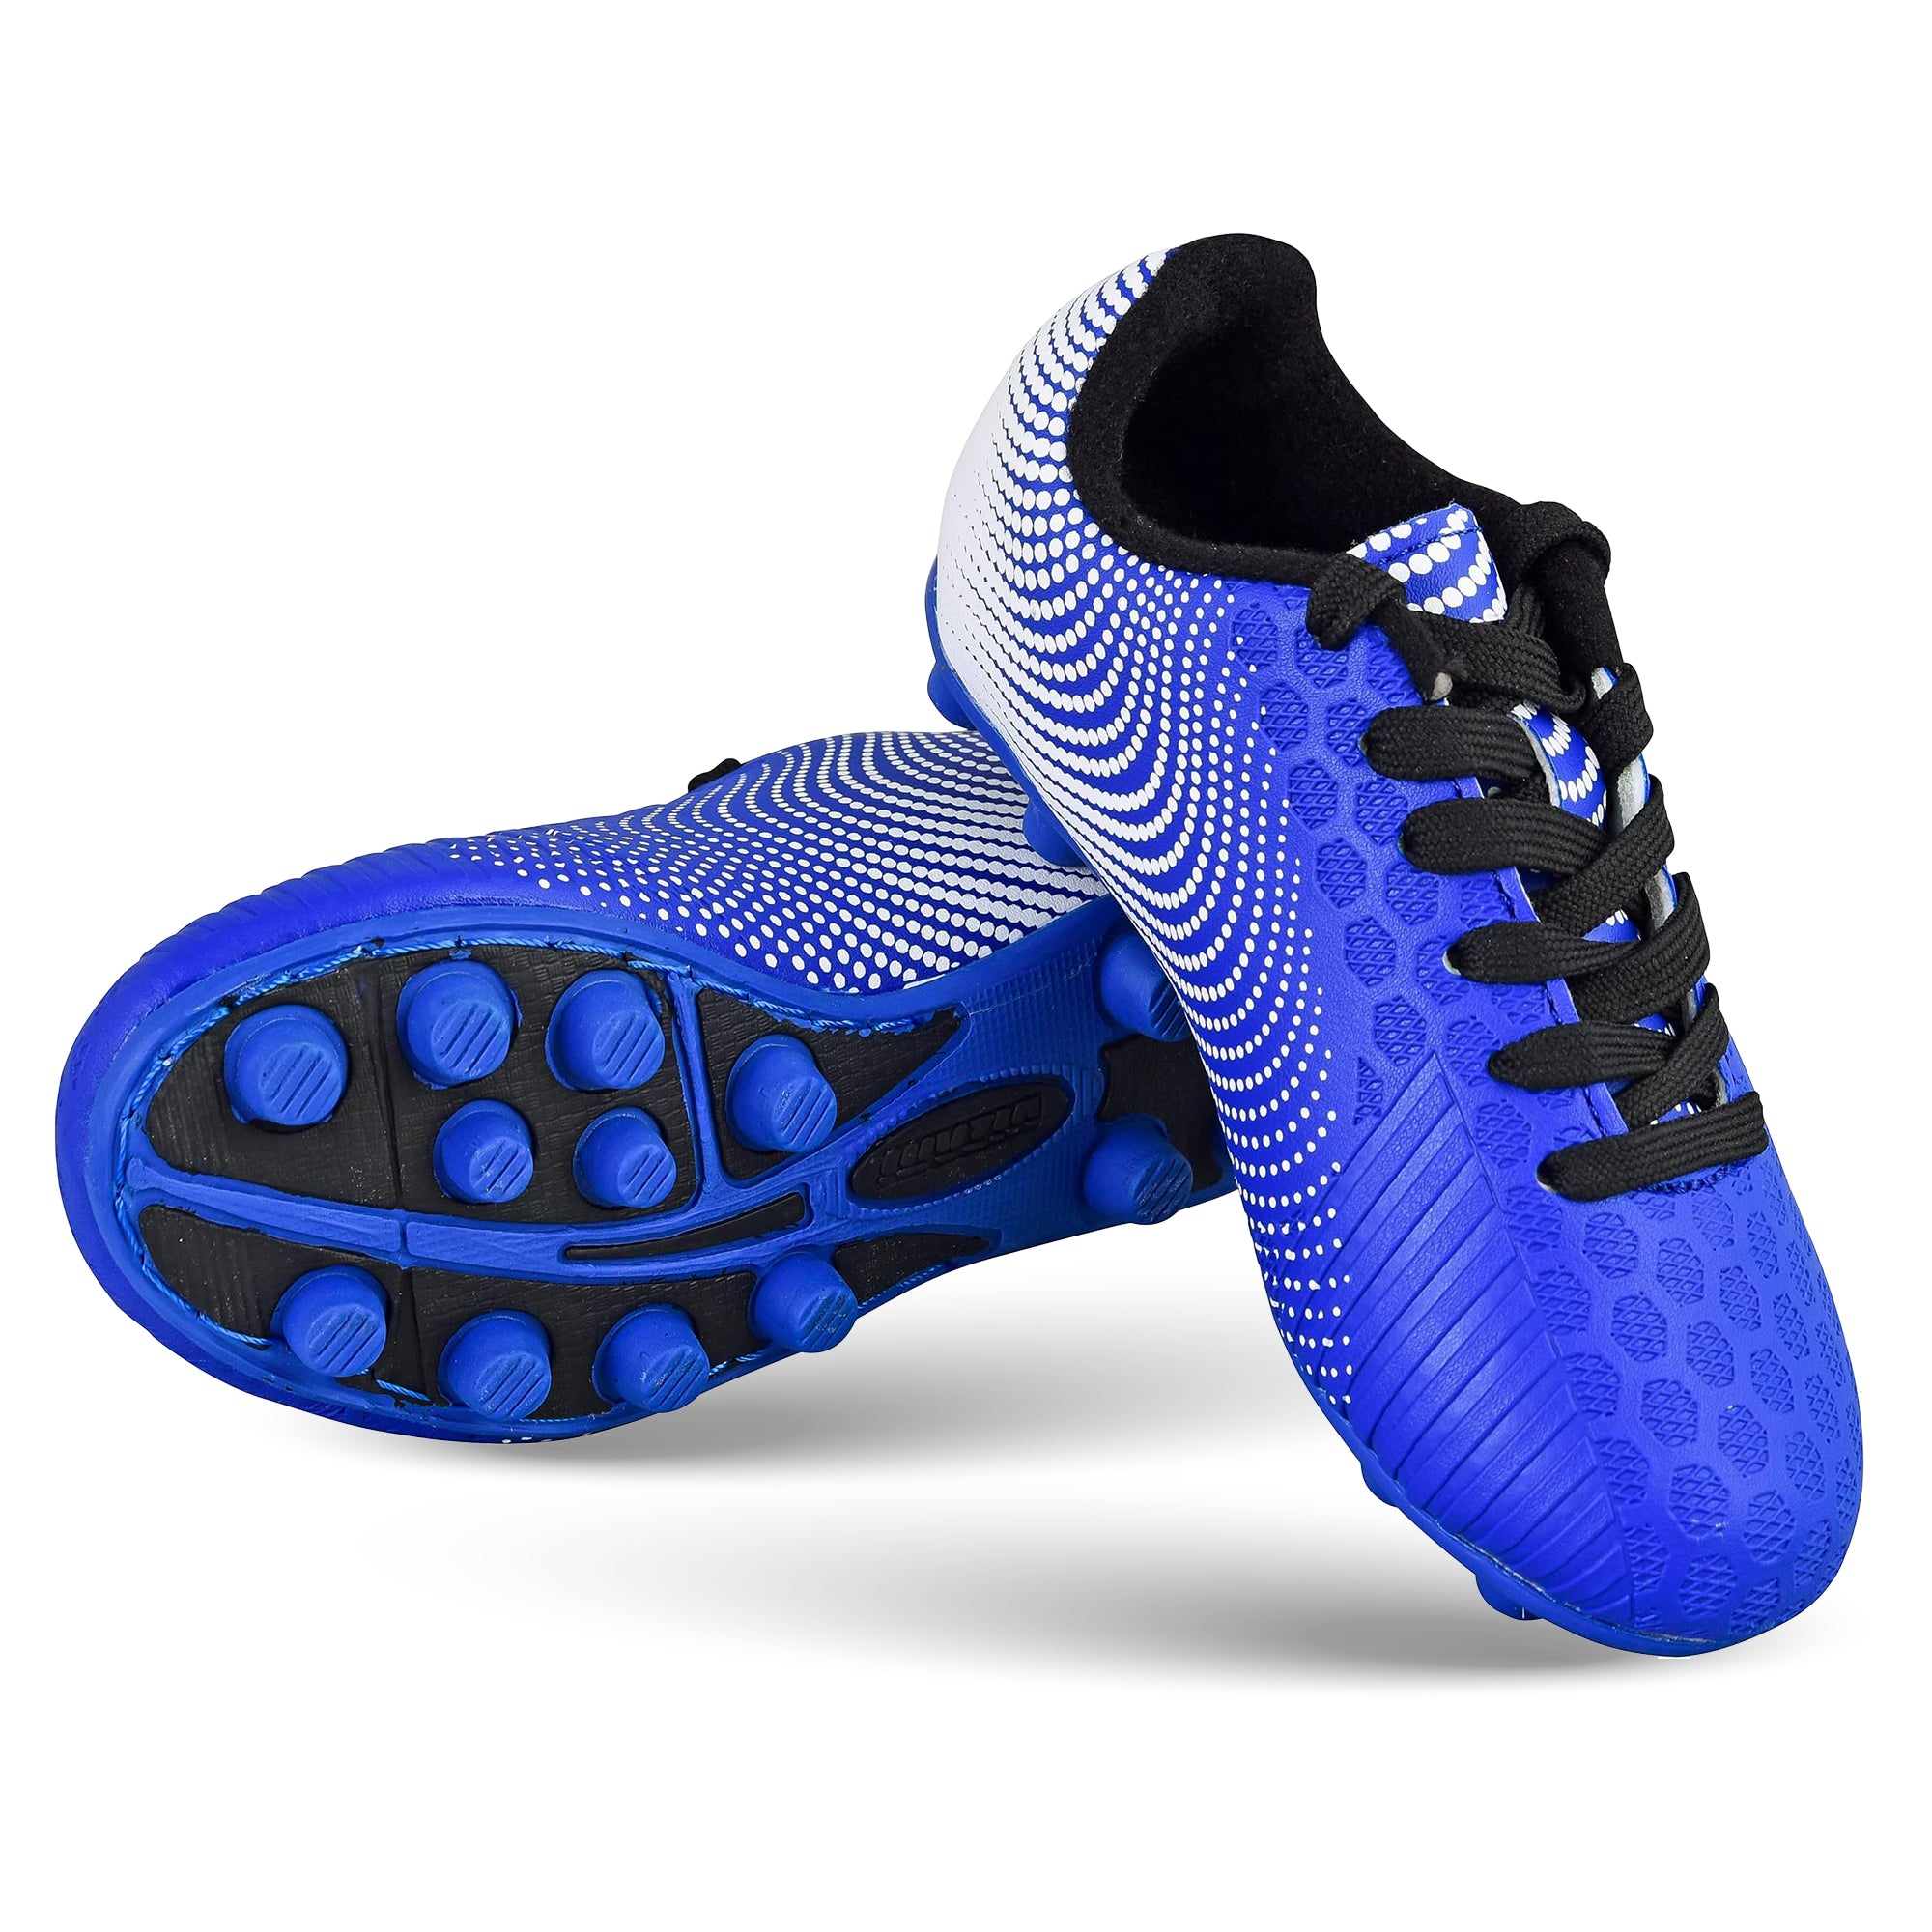 Stealth Firm Ground Soccer Shoes -Blue/White